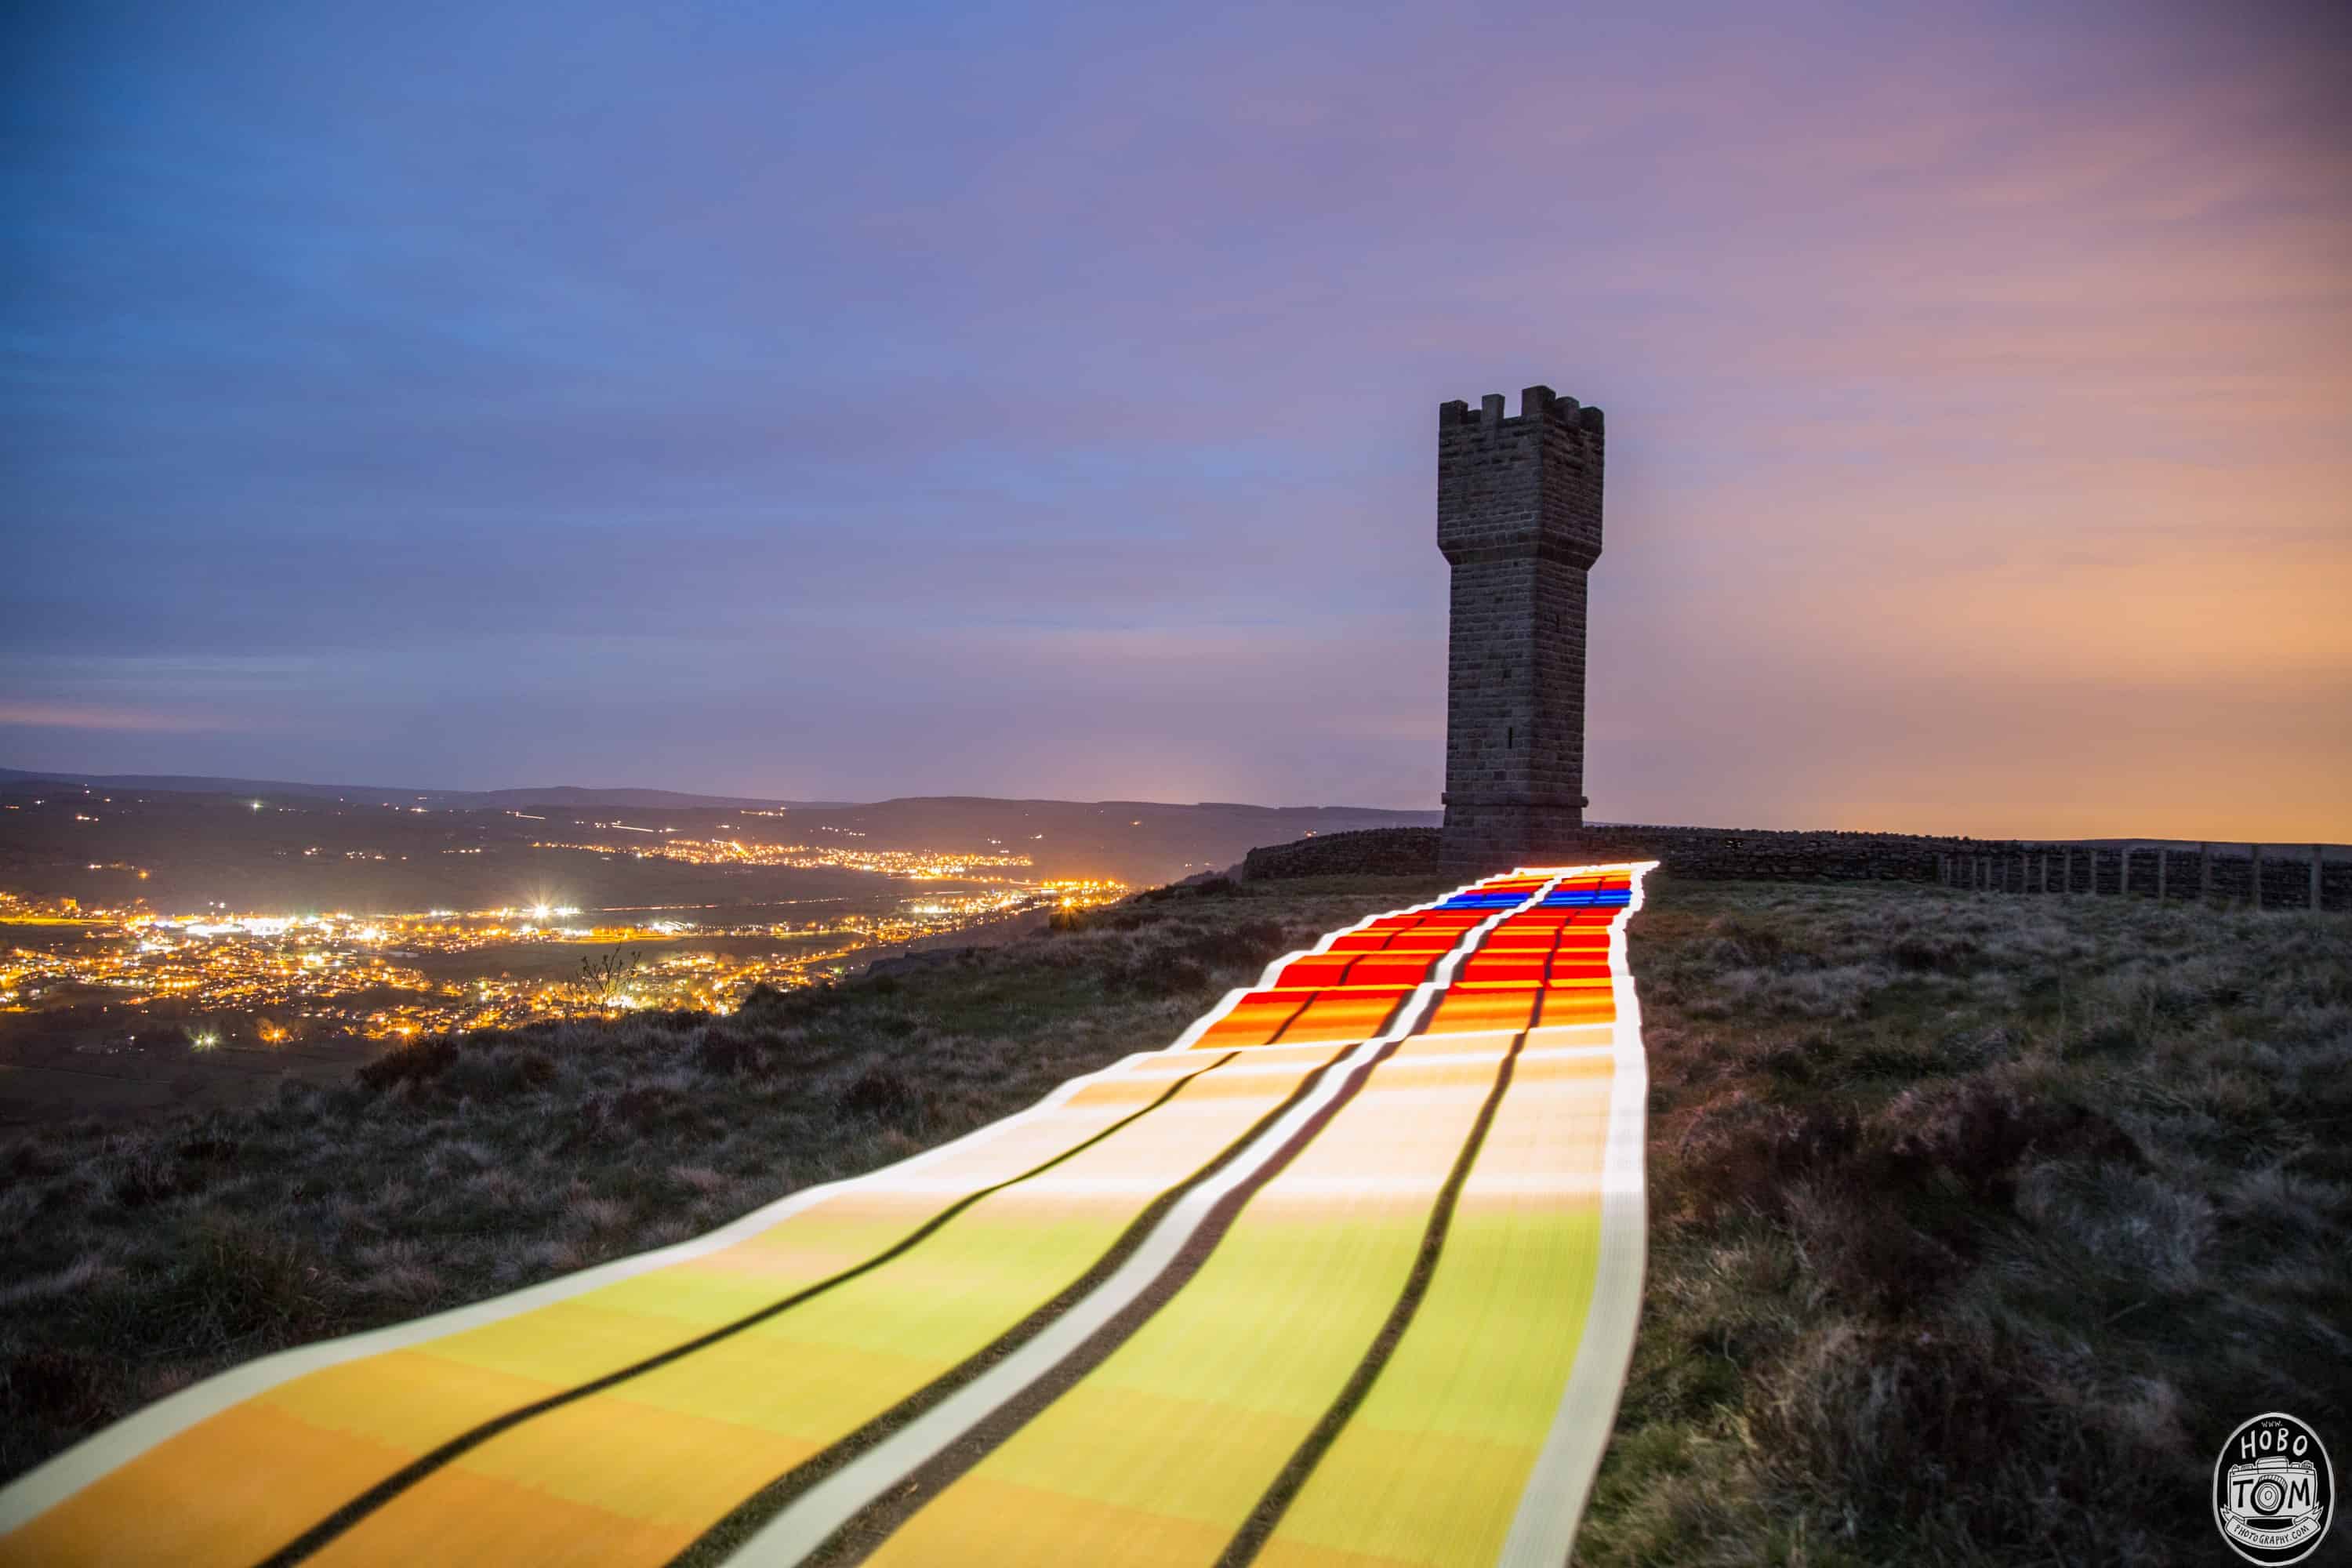 Light painting at Lund's Tower